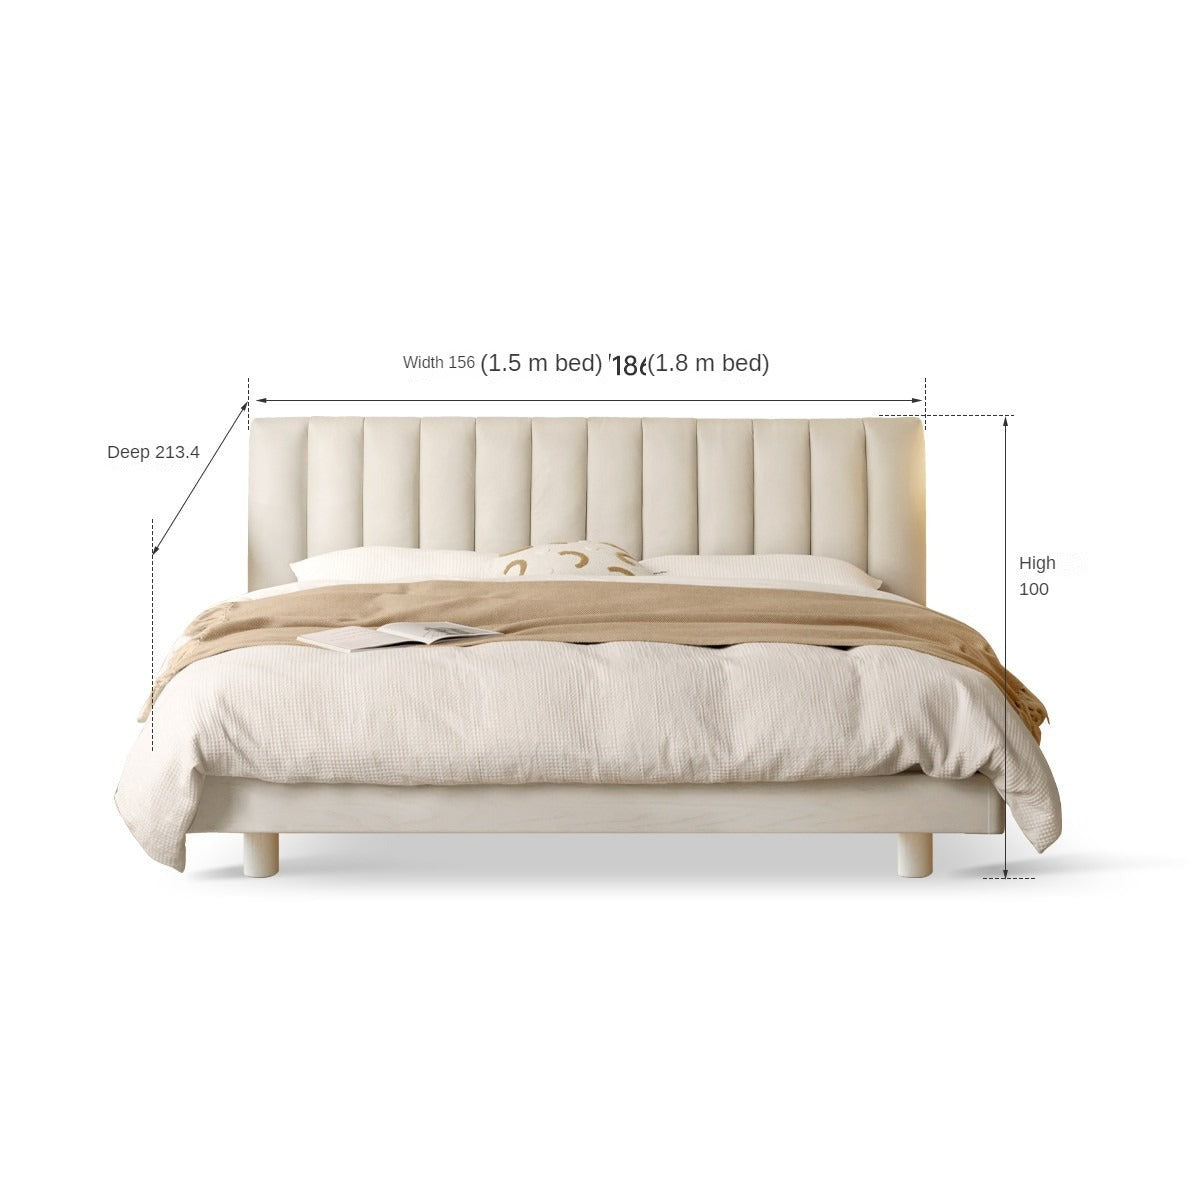 Oak Solid Wood Cream Suspended Genuine leather Technology Fabric Soft Wrapped Bed _)